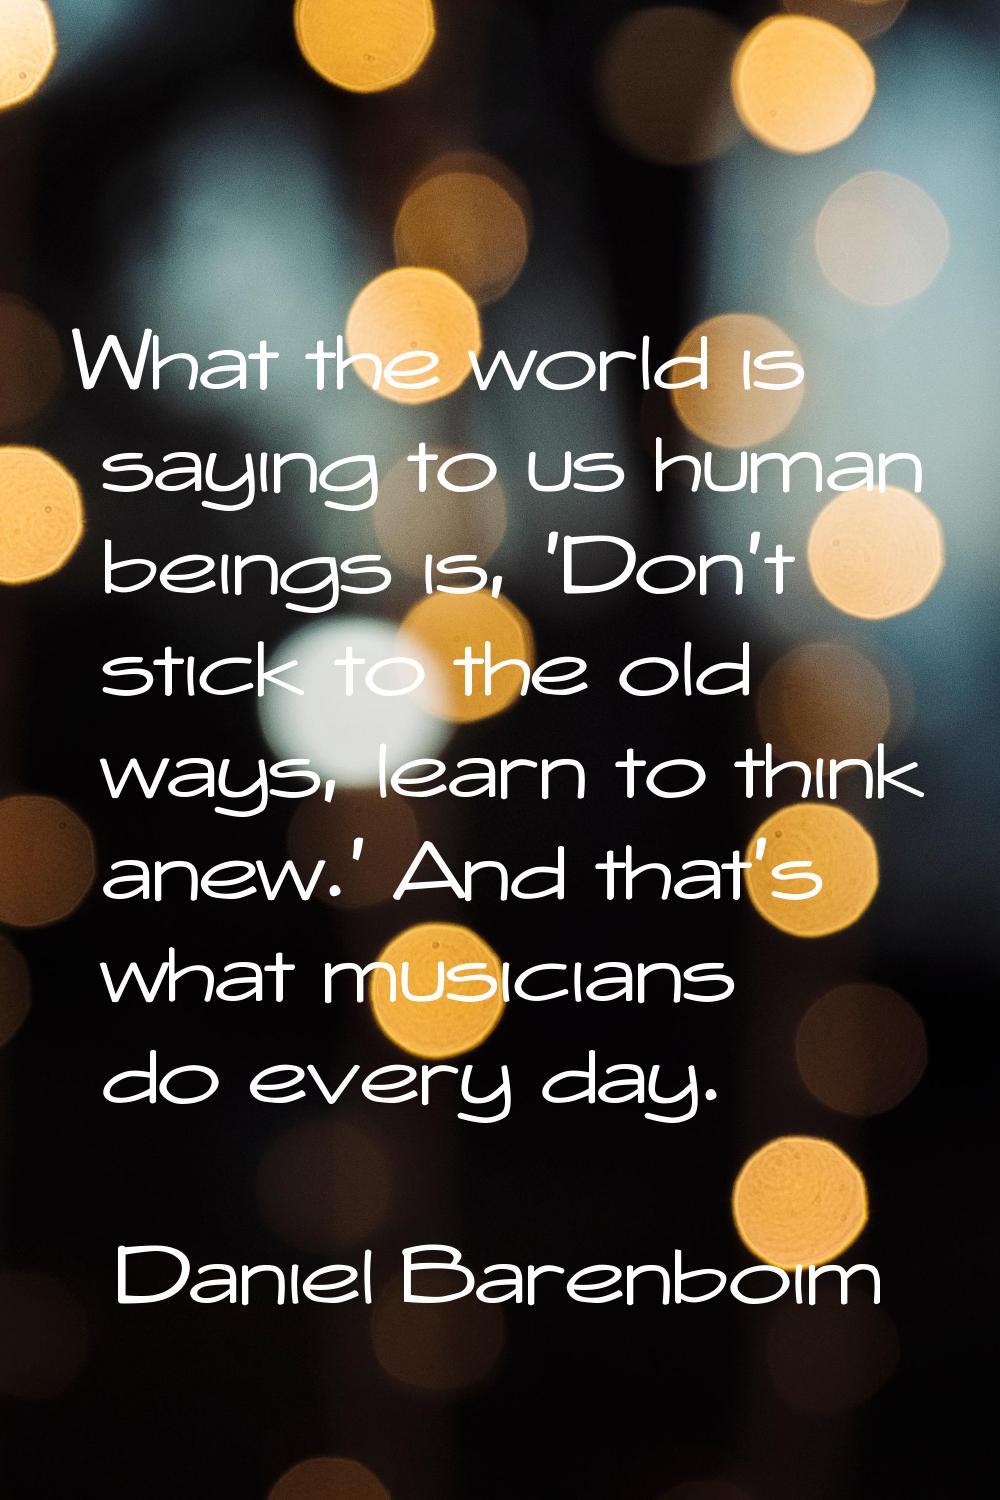 What the world is saying to us human beings is, 'Don't stick to the old ways, learn to think anew.'